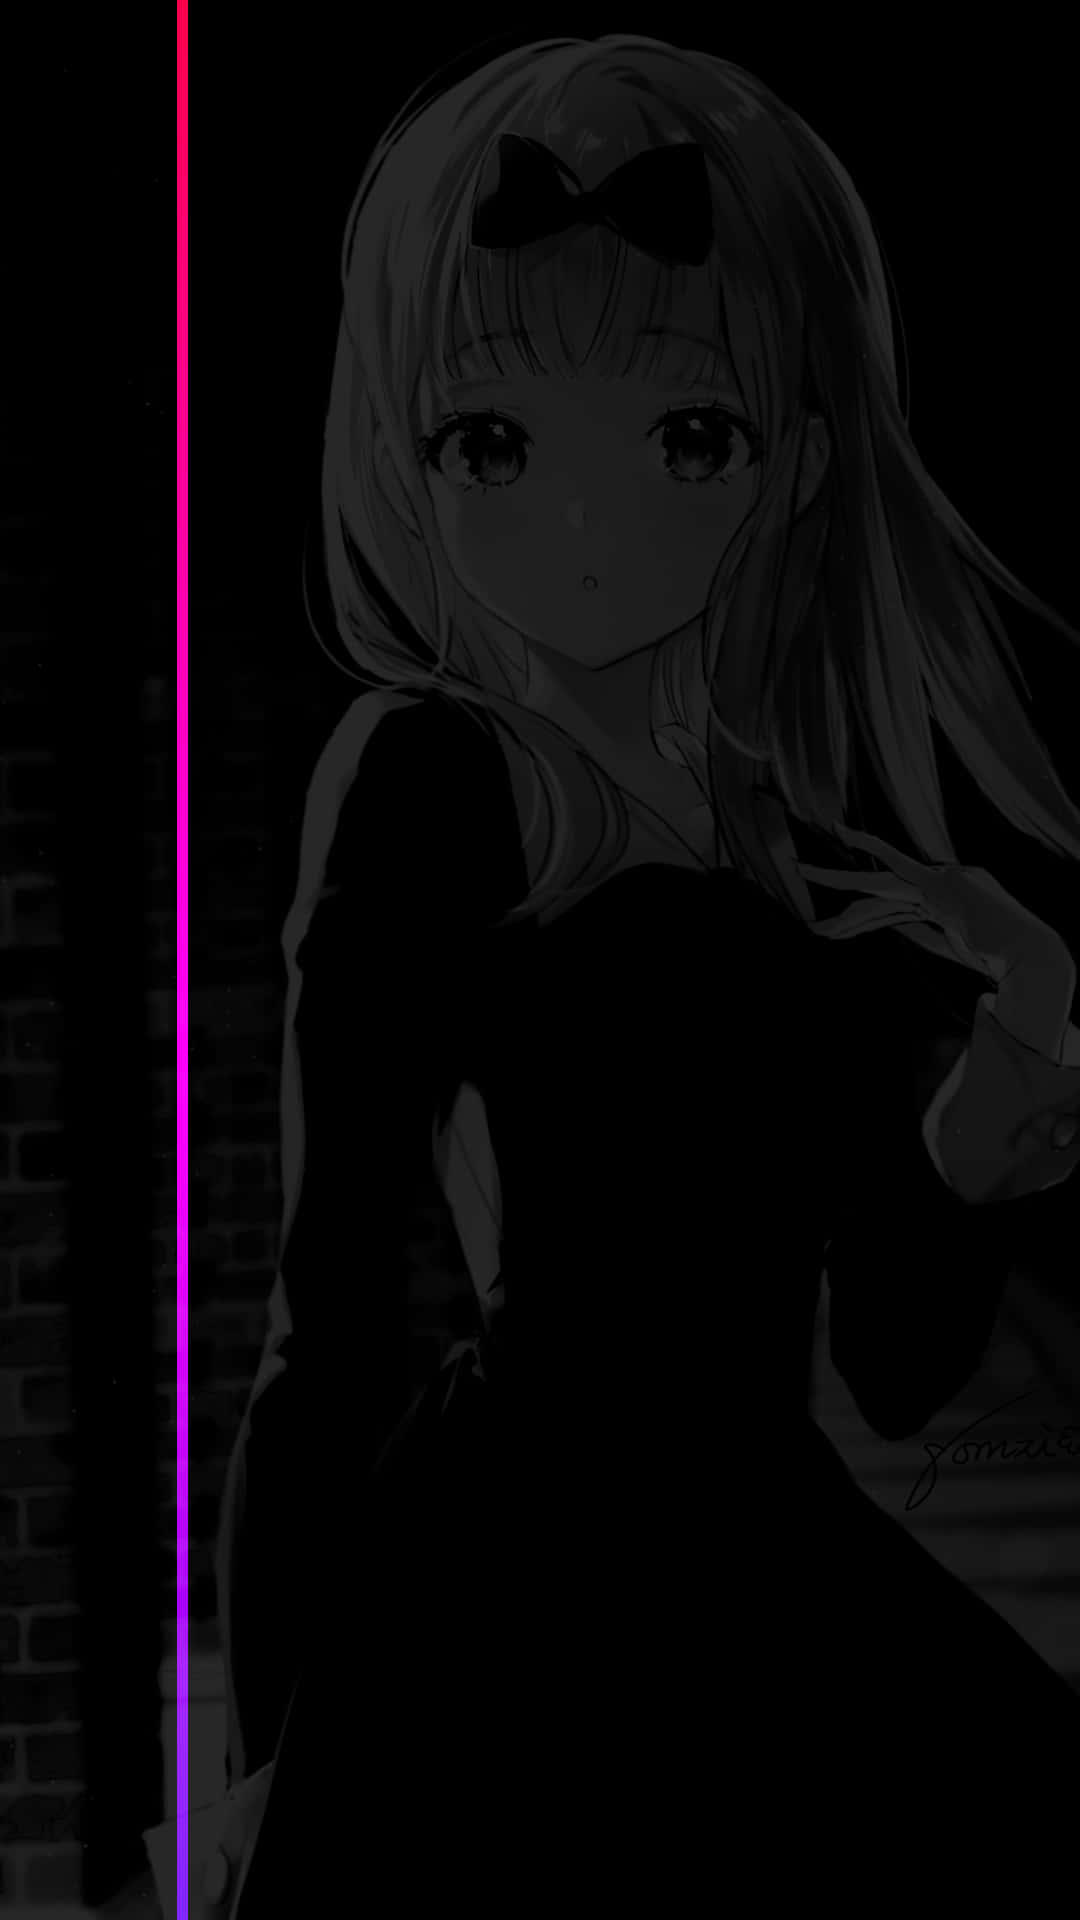 Download “Dark Anime Girl with a Mysterious Allure” Wallpaper